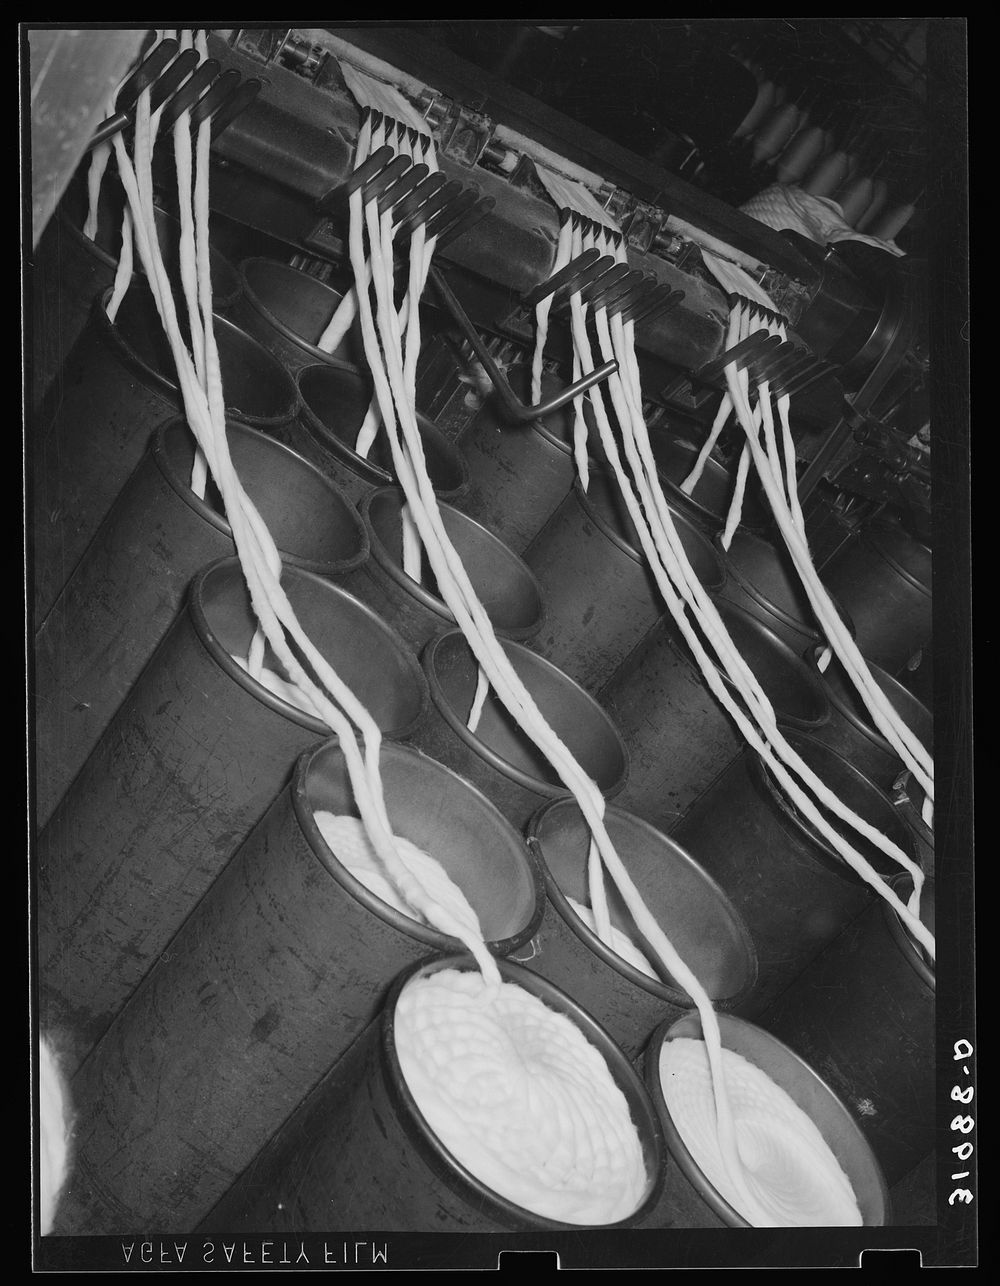 Bin of cotton rope being fed into thread-making machine. Laurel cotton mills, Laurel, Mississippi by Russell Lee